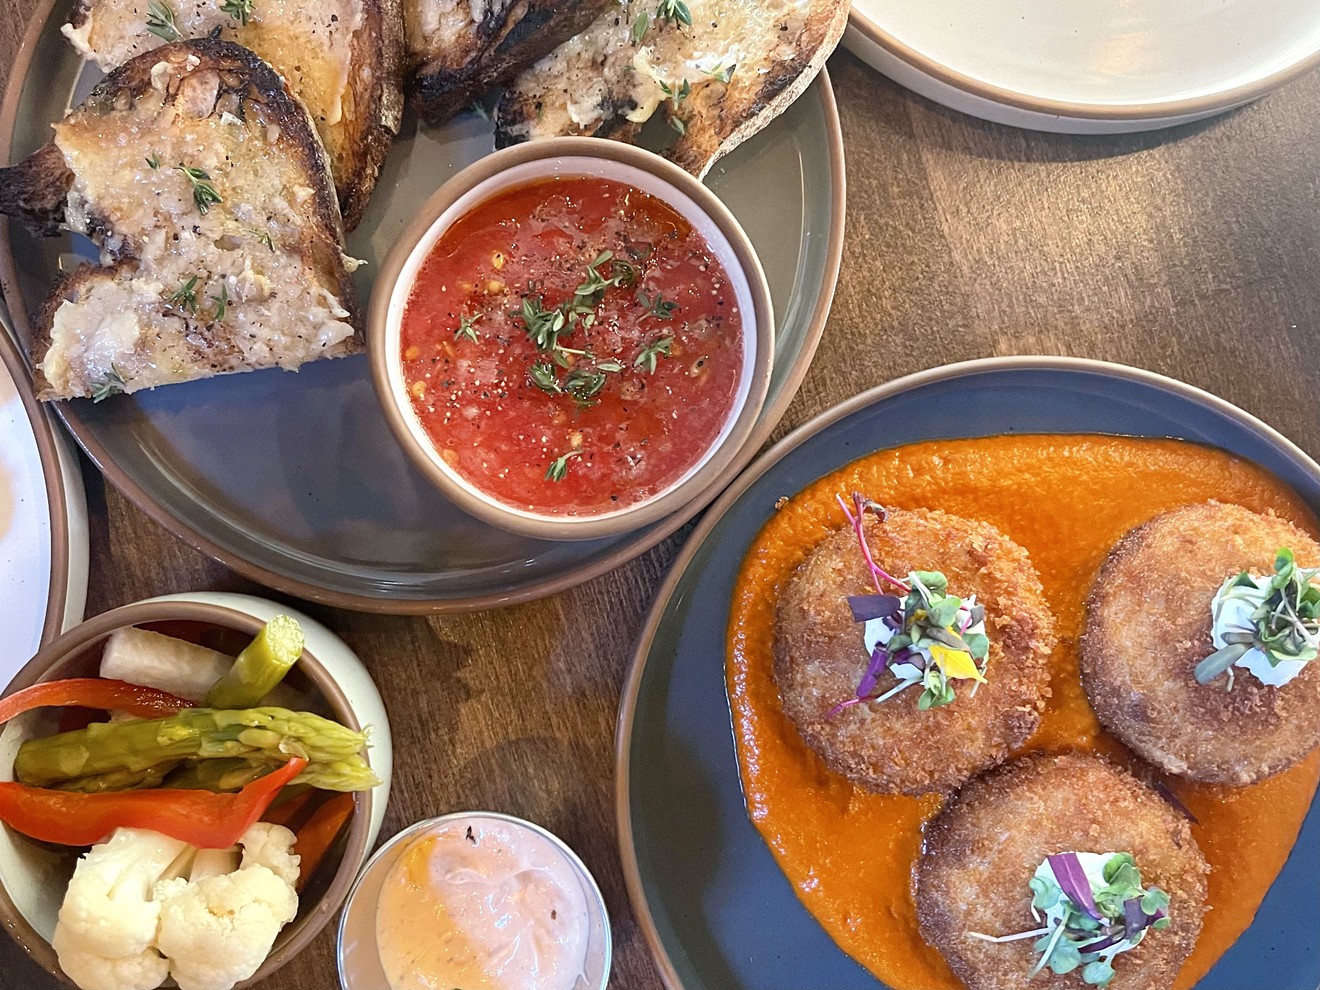 The tapas menu at Dahlia is tight but filled with creative dishes.